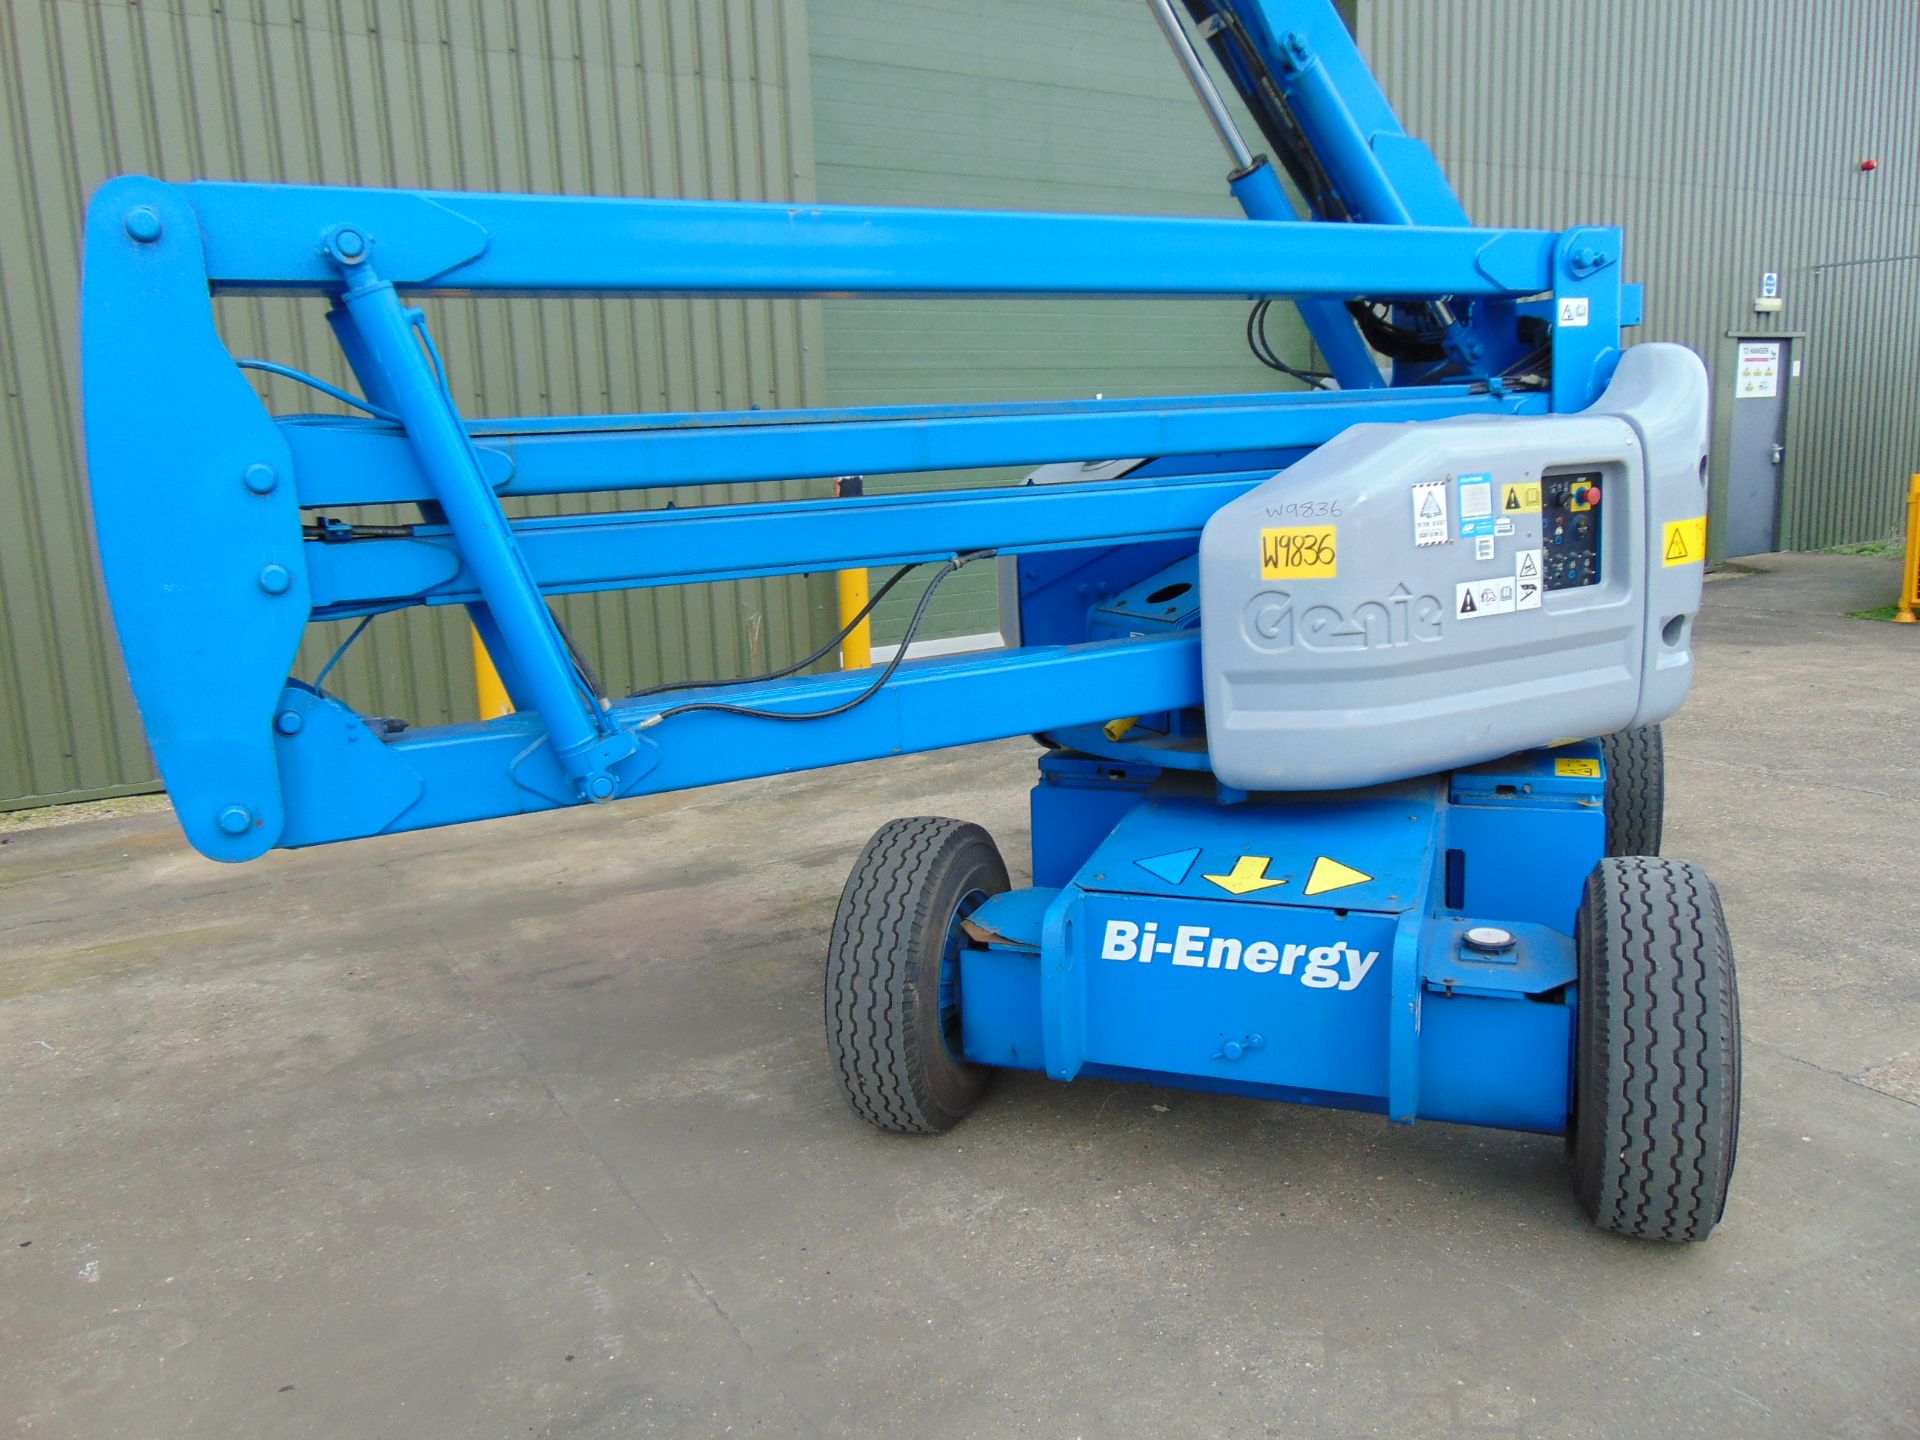 2005 Genie Z45-25J Diesel Articulated Boom Lift ONLY 775 HOURS - Image 7 of 24